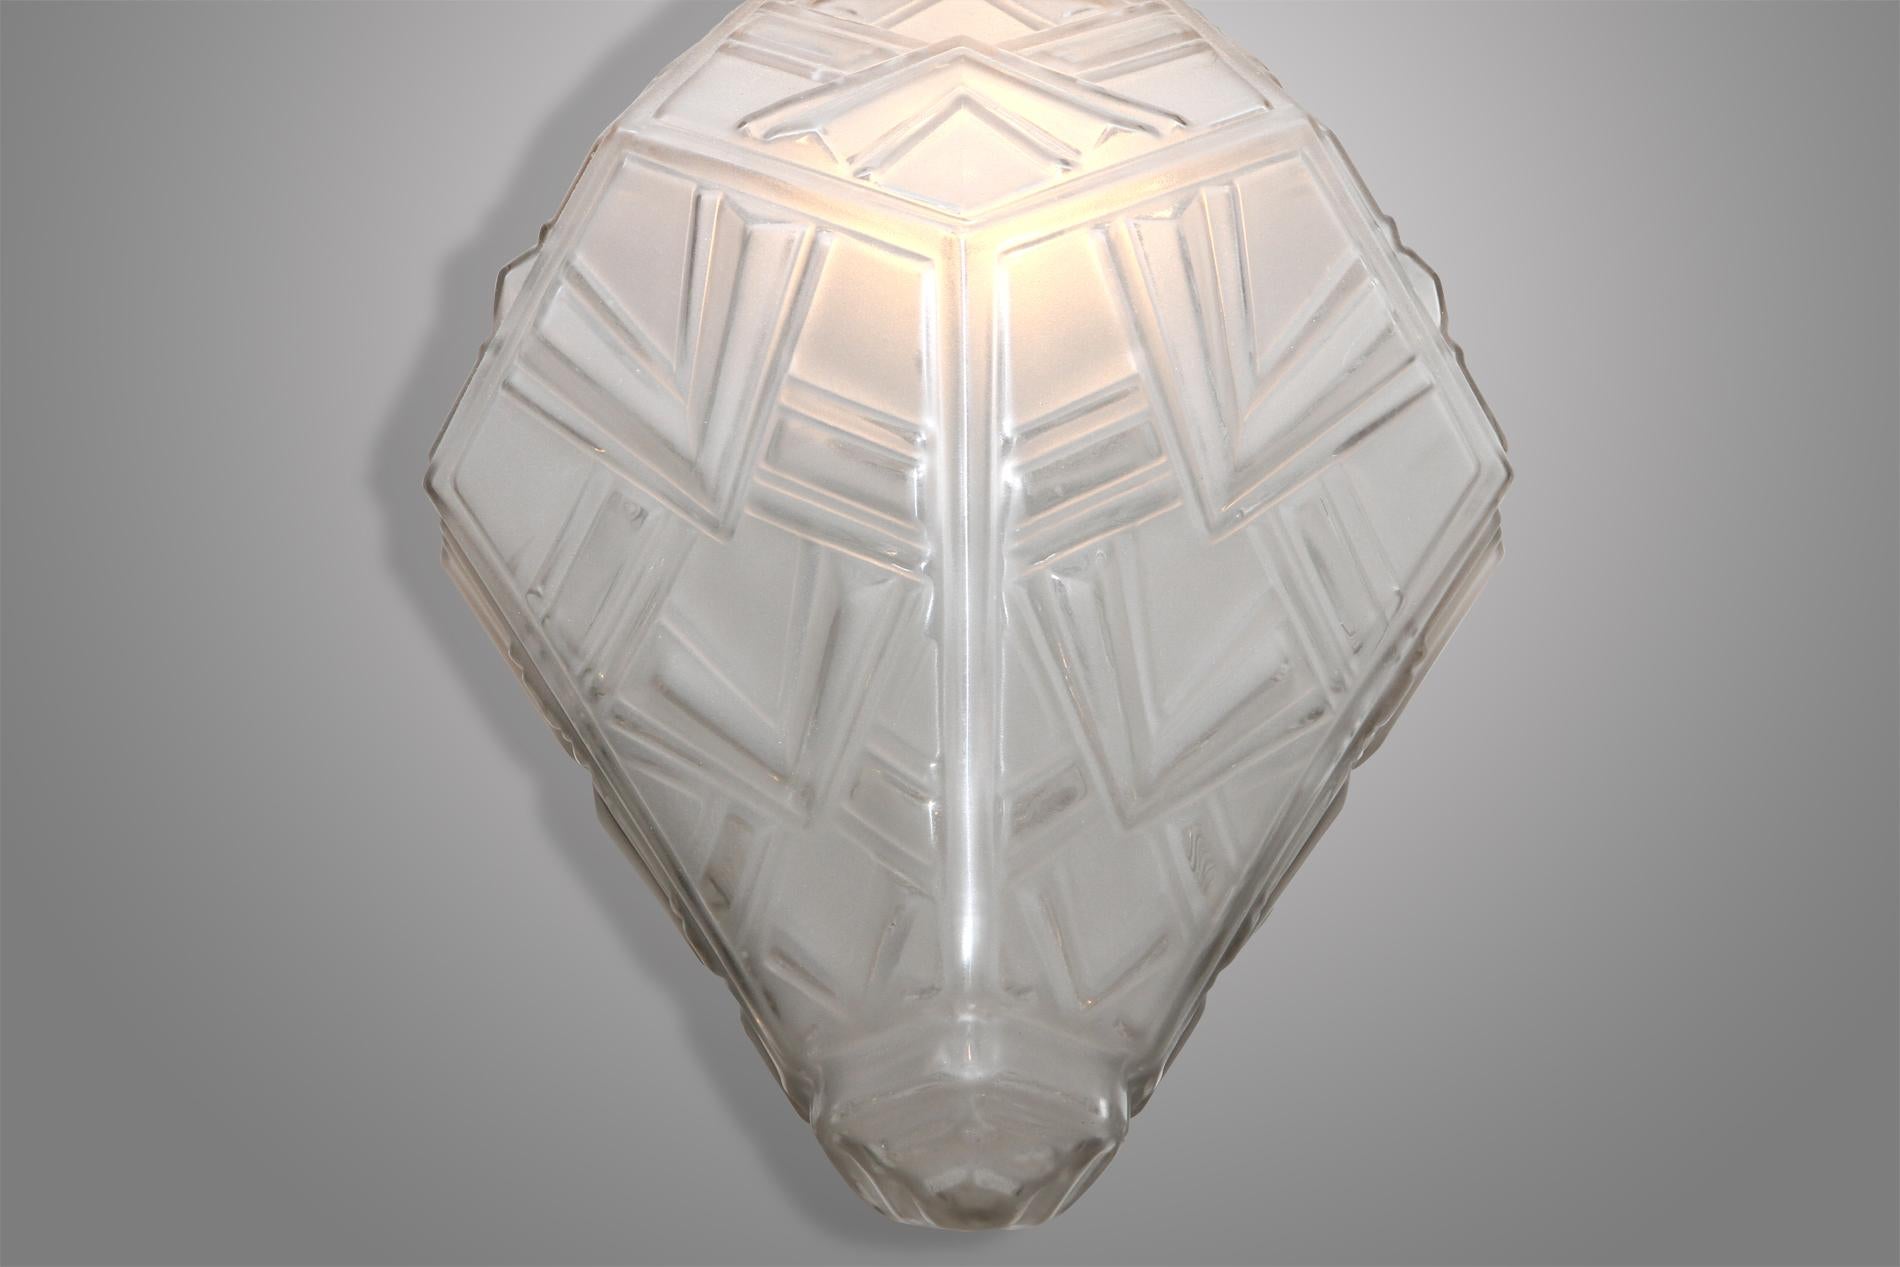 20th Century French Art Deco lantern chandelier  by Genet & Michon  For Sale